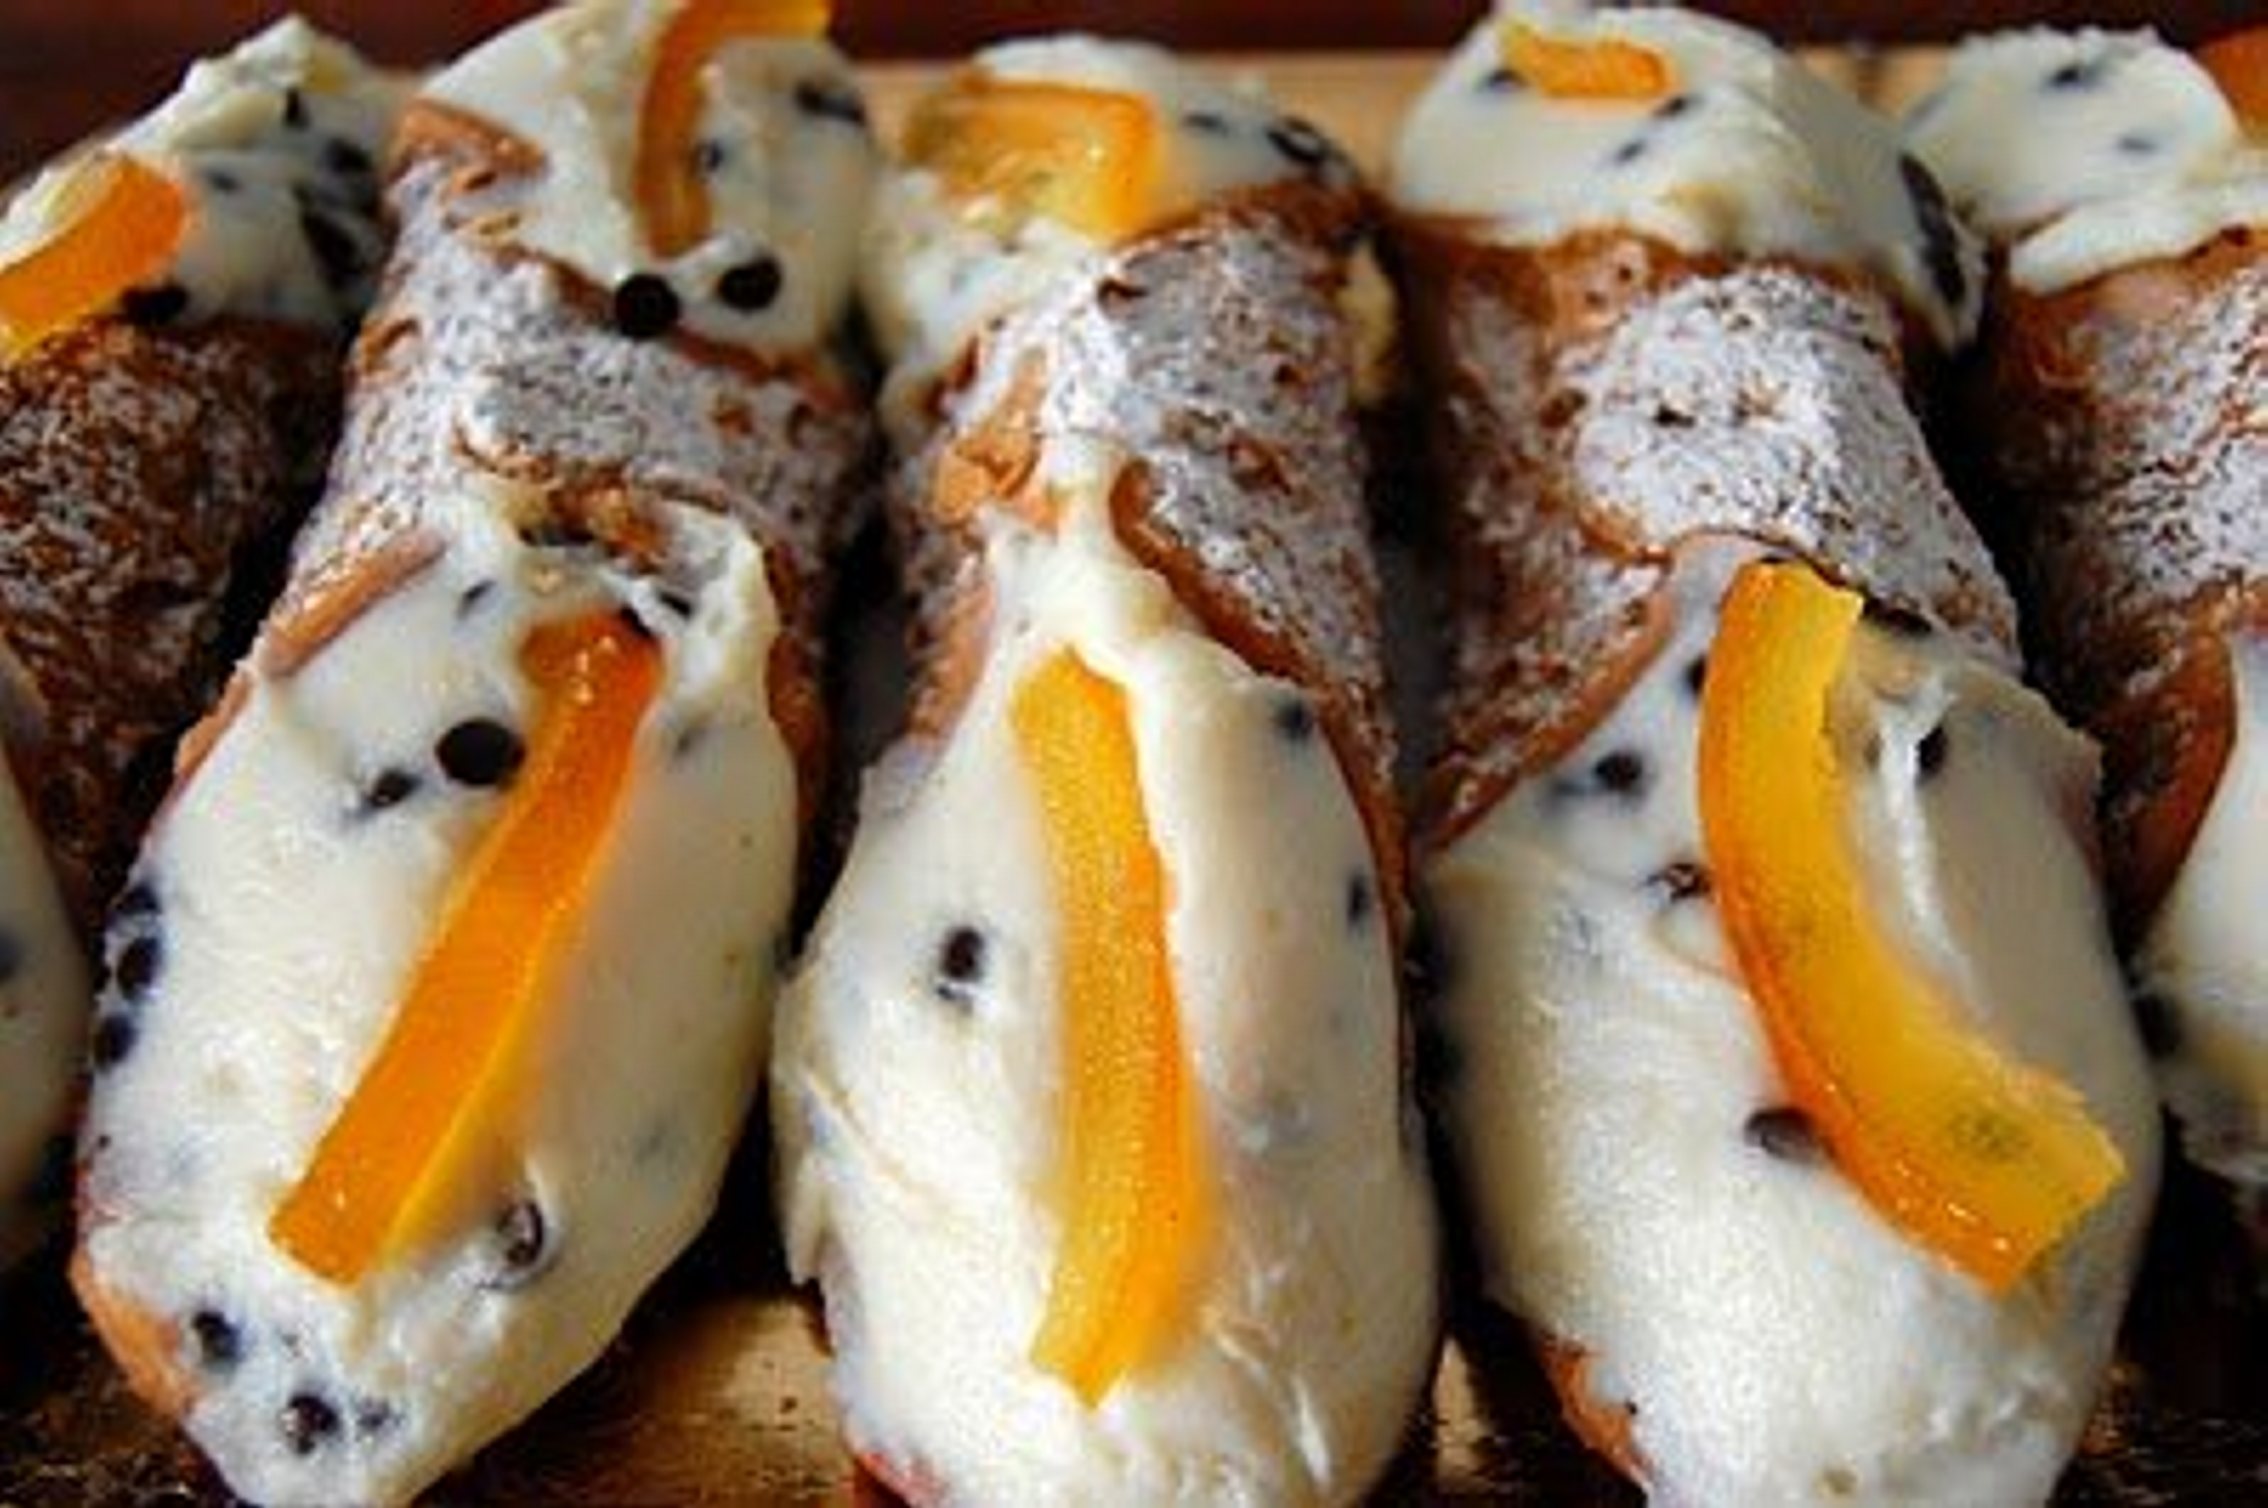 Make Your Own Cannoli | Visititaly.info